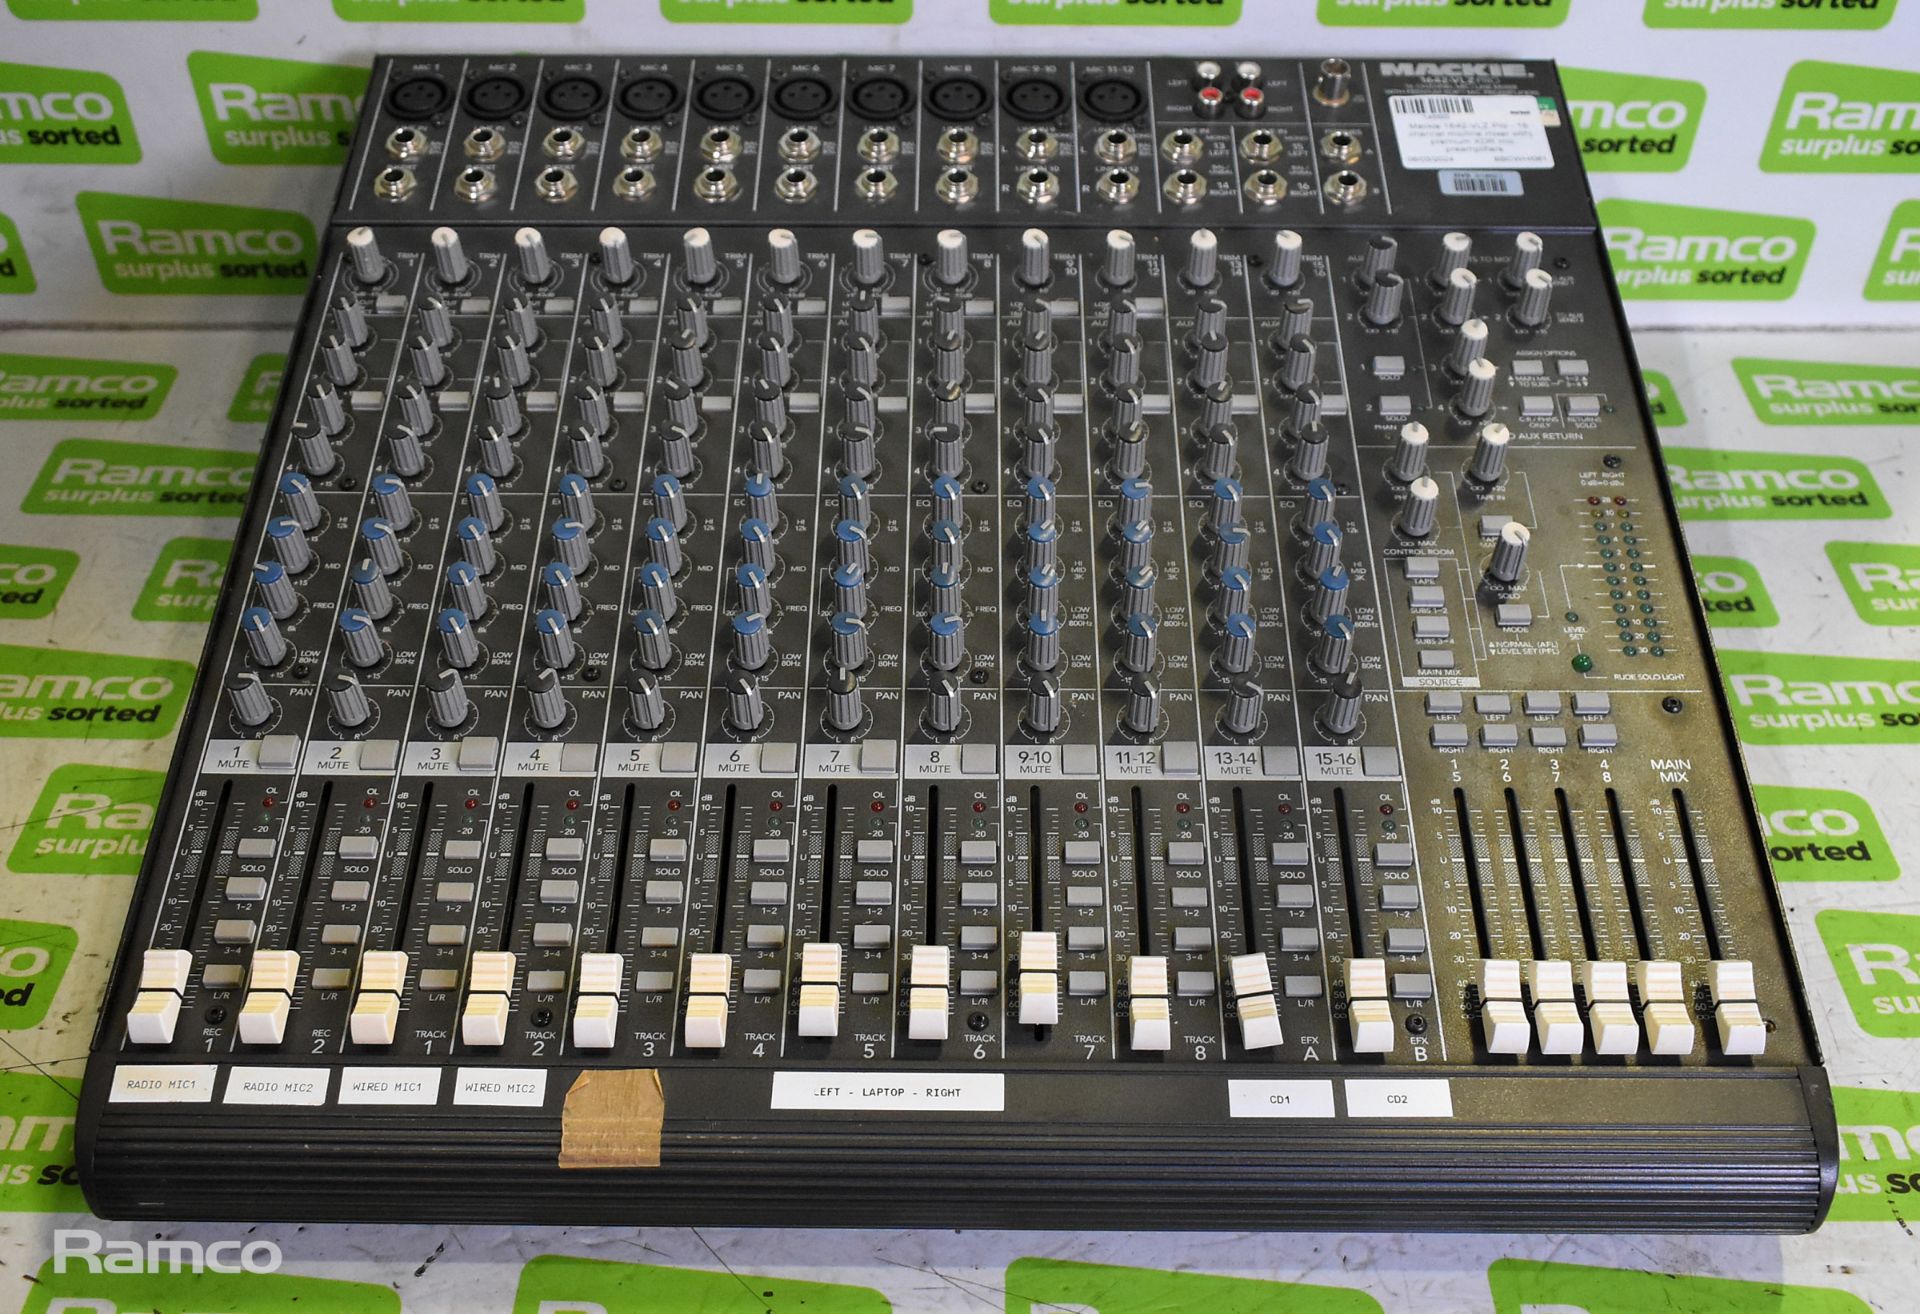 Mackie 1642-VLZ Pro 16 channel mic/line mixer with premium XDR mic preamplifiers